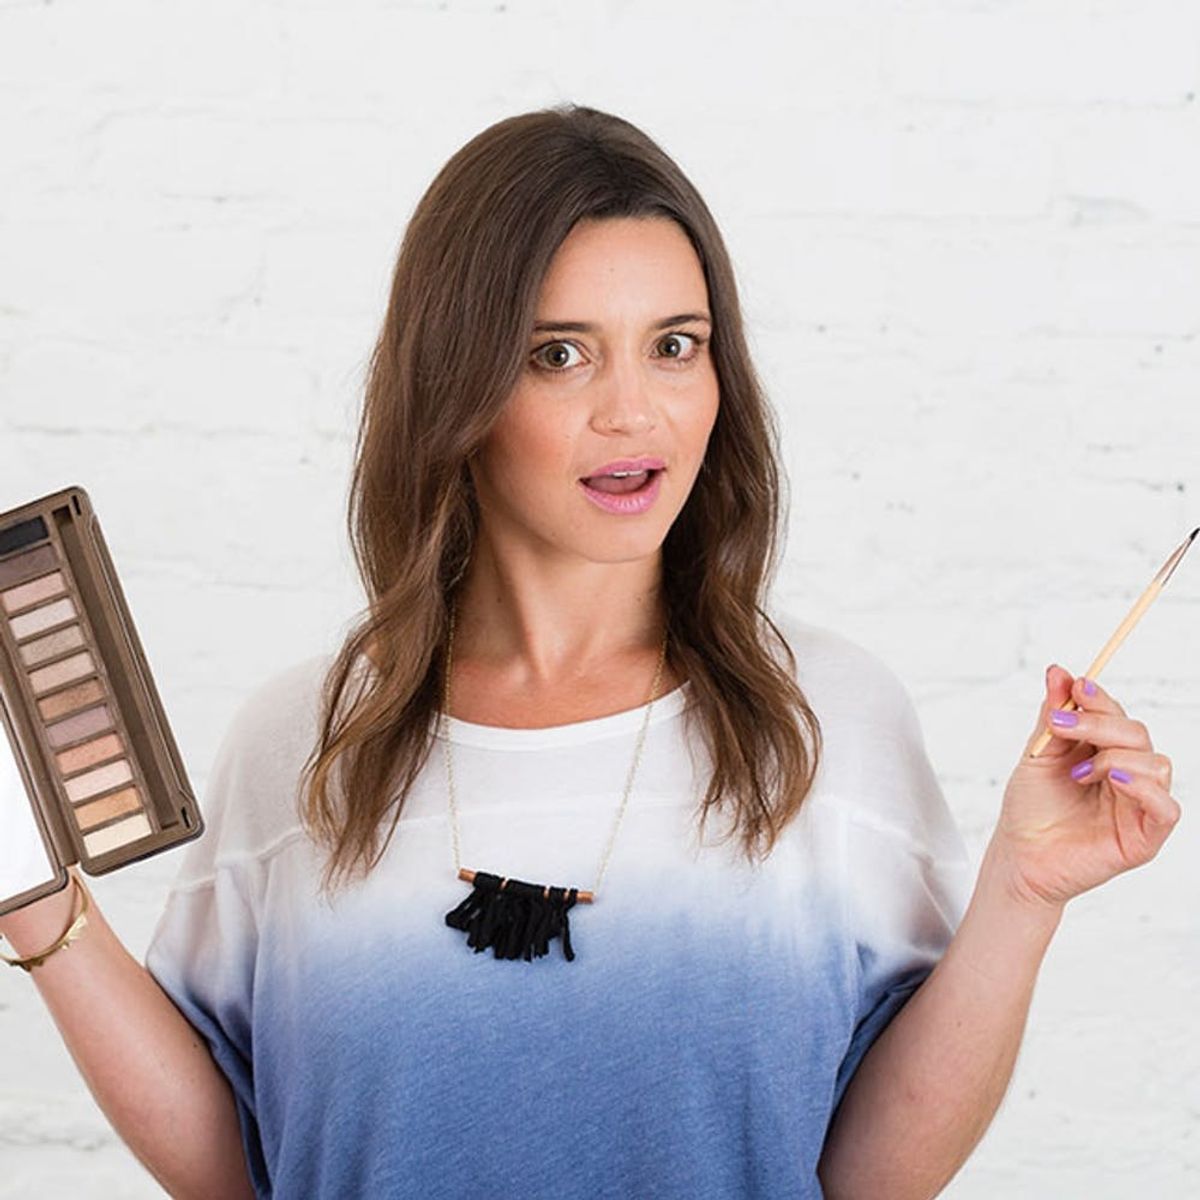 Beauty Mythbuster: Is Eyeshadow Really the Secret Product for Fuller Hair?!